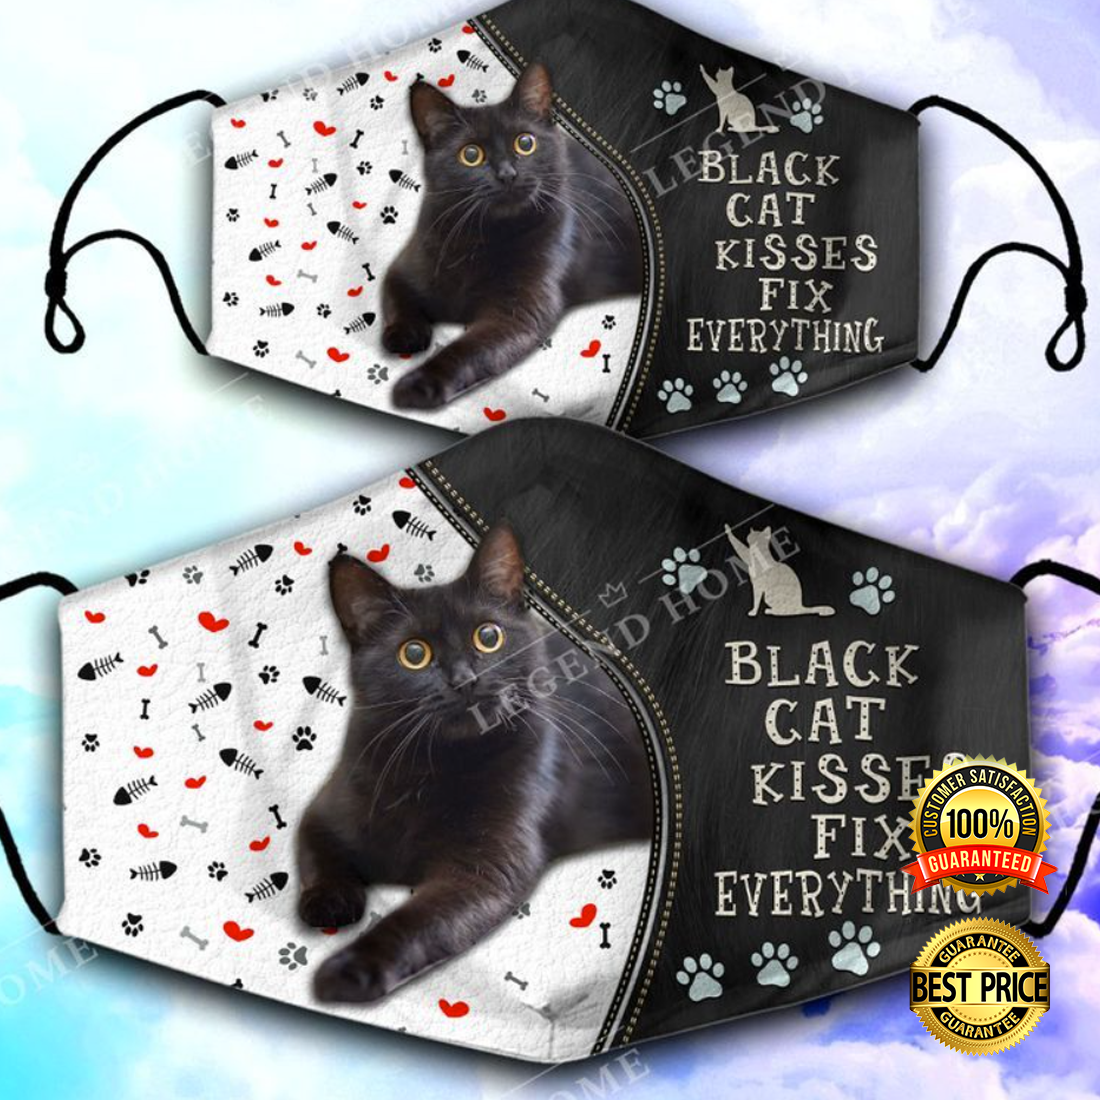 Black cat kisses fix everything face mask 4